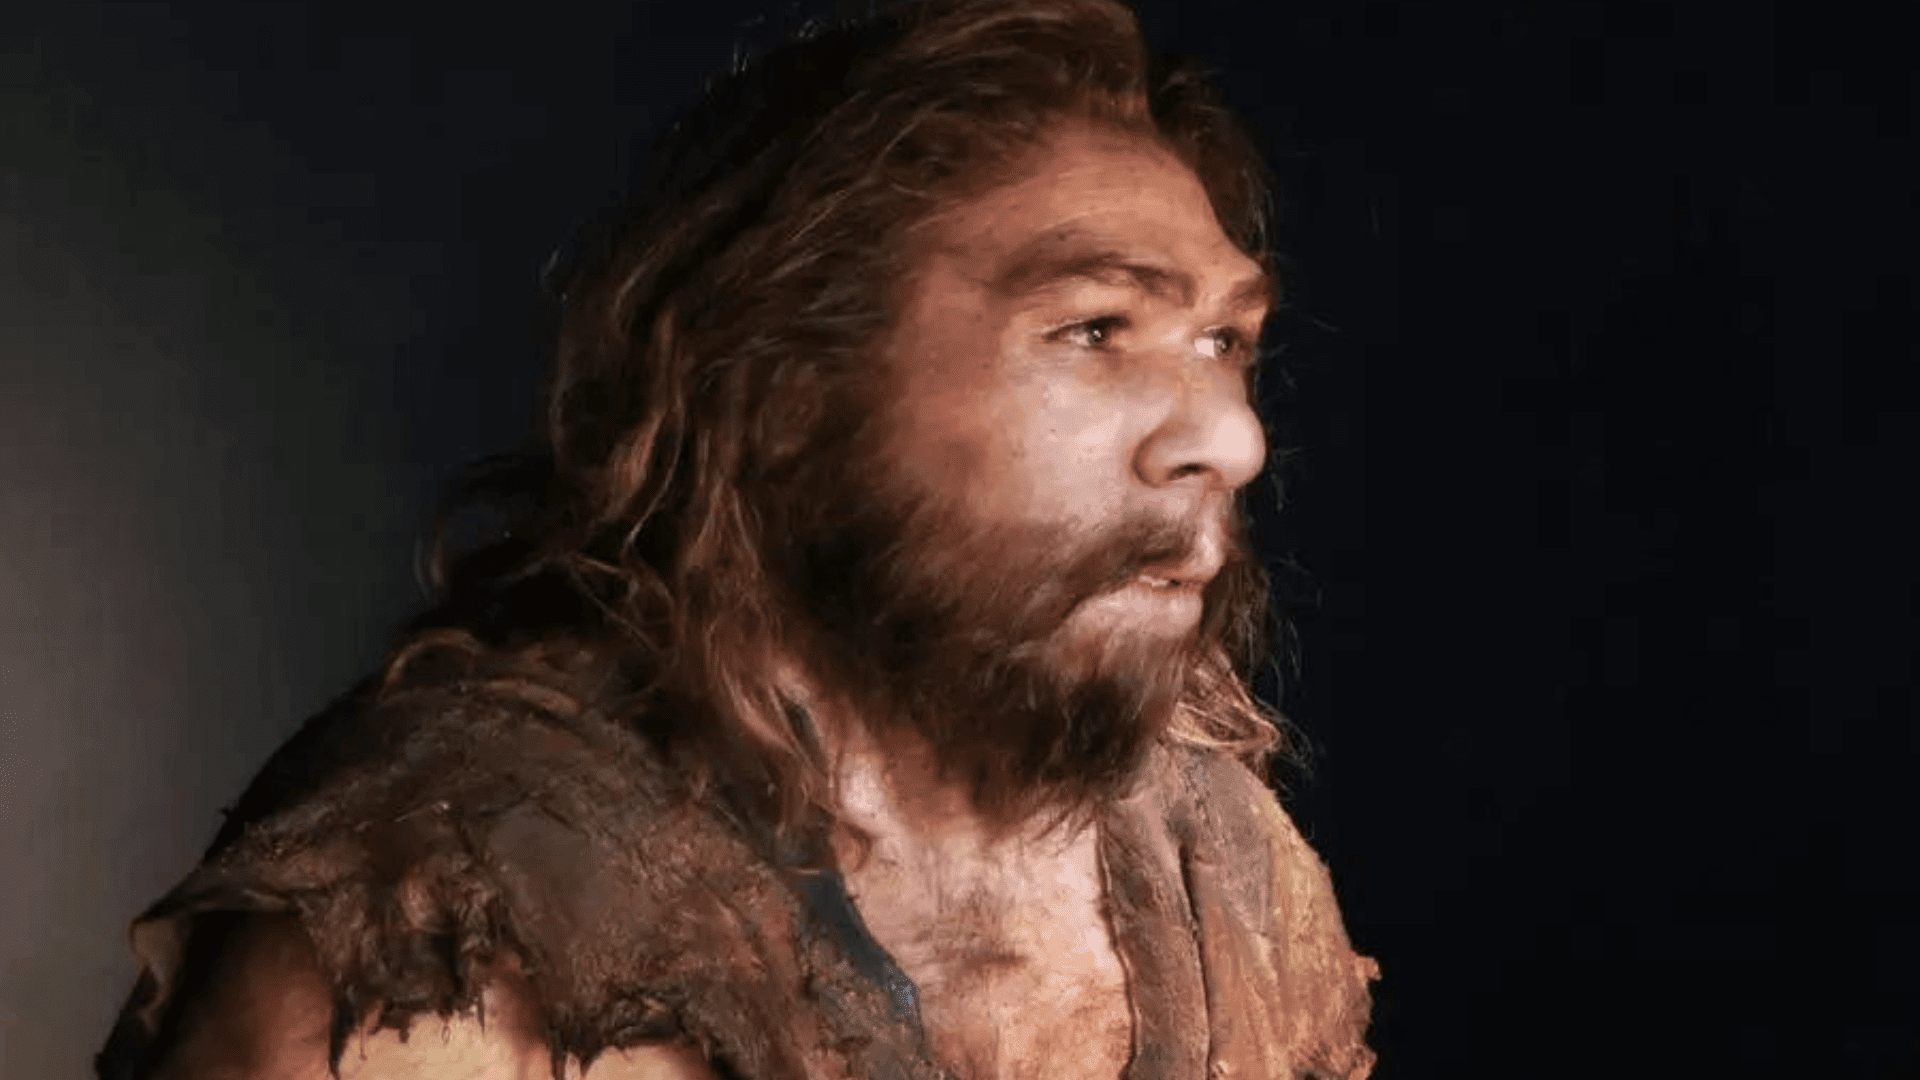 Neanderthals were affected by some of the same viruses as modern humans S. ENTRESSANGLE:E. DAYNES:SCIENCE PHOTO LIBRARY